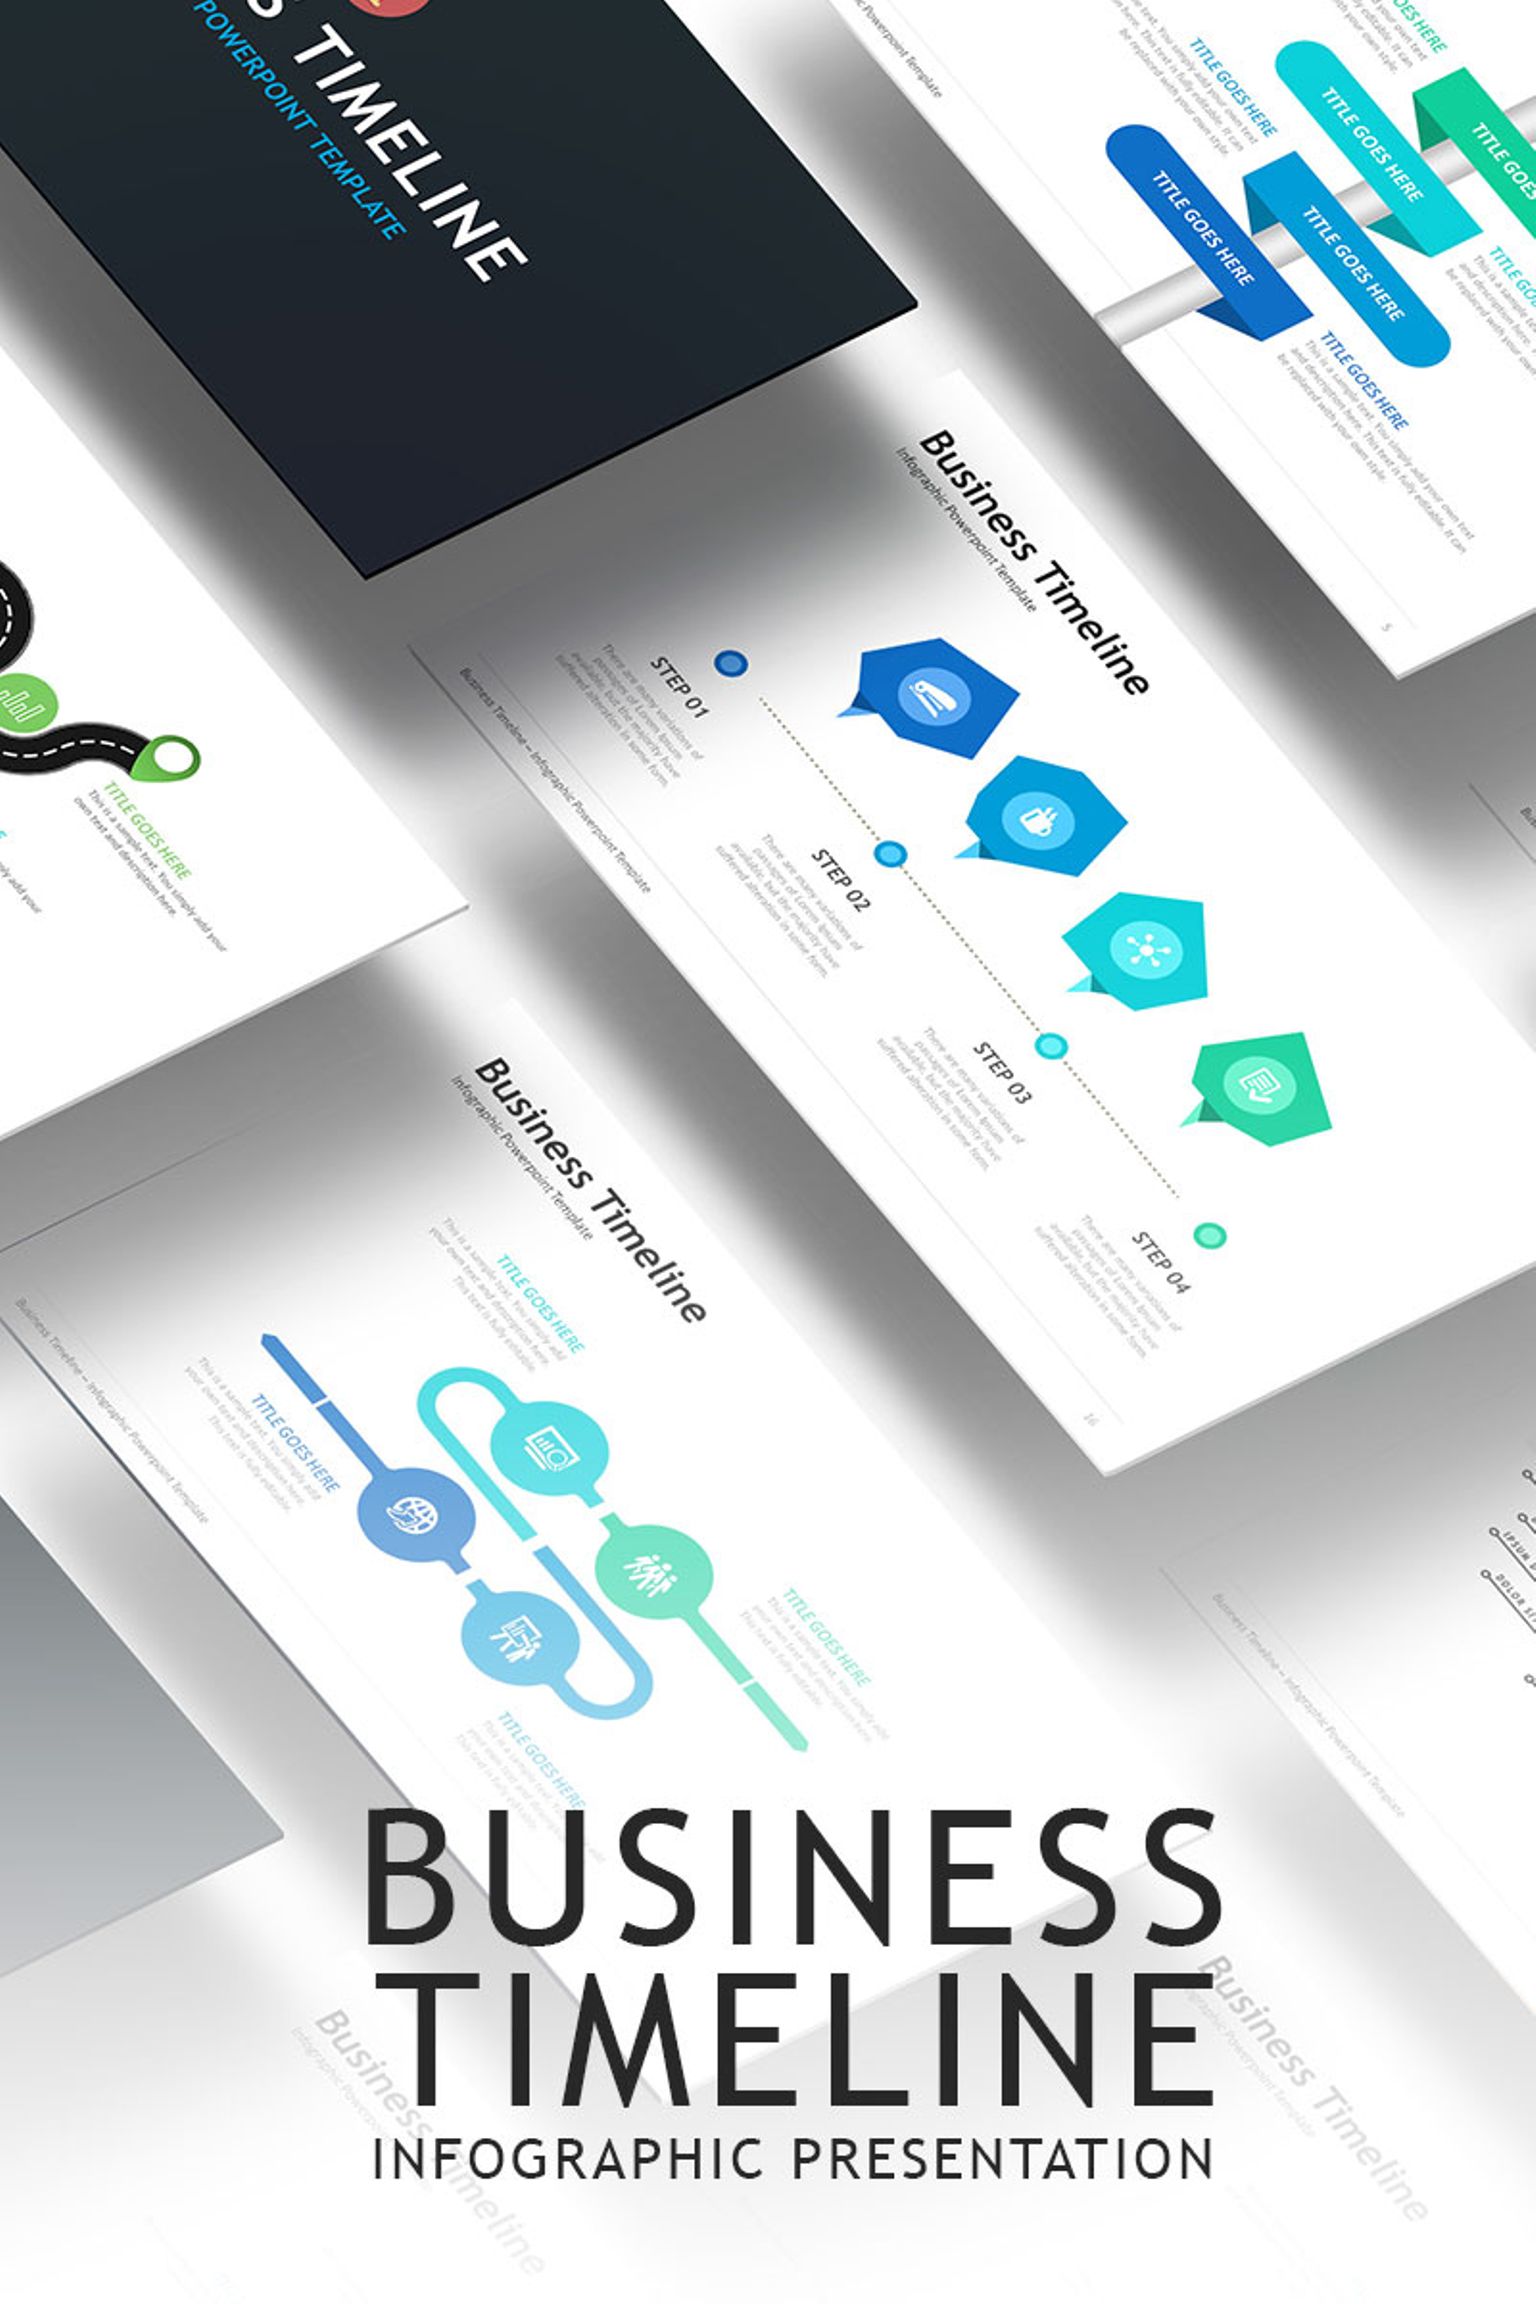 Business Timeline - Infographic PowerPoint template